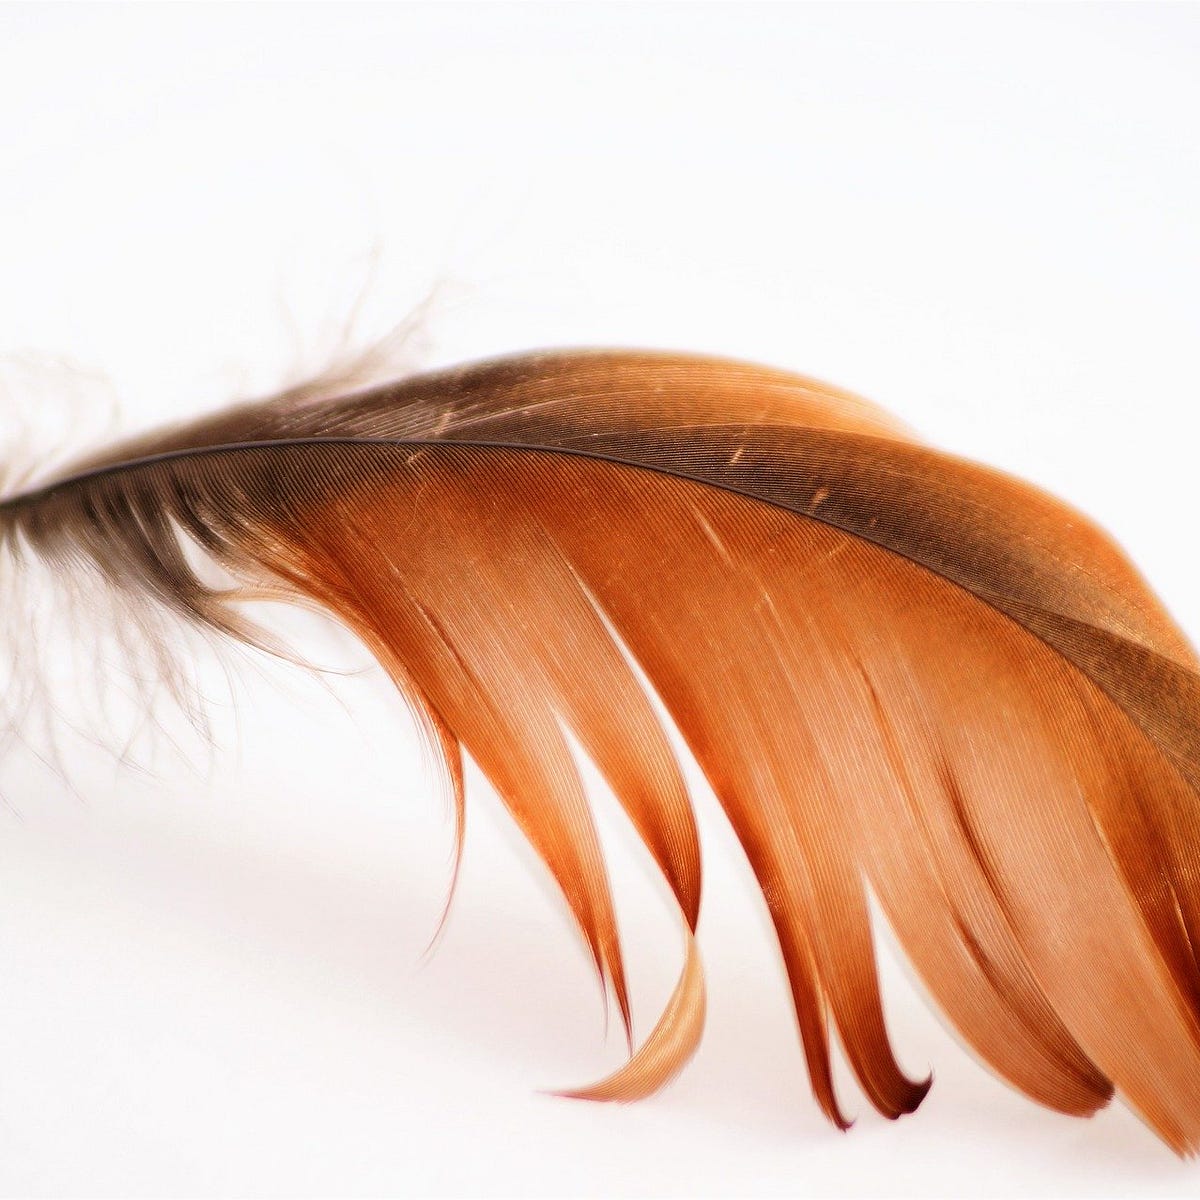 Why collecting bird feathers could cost you $15,000 fine